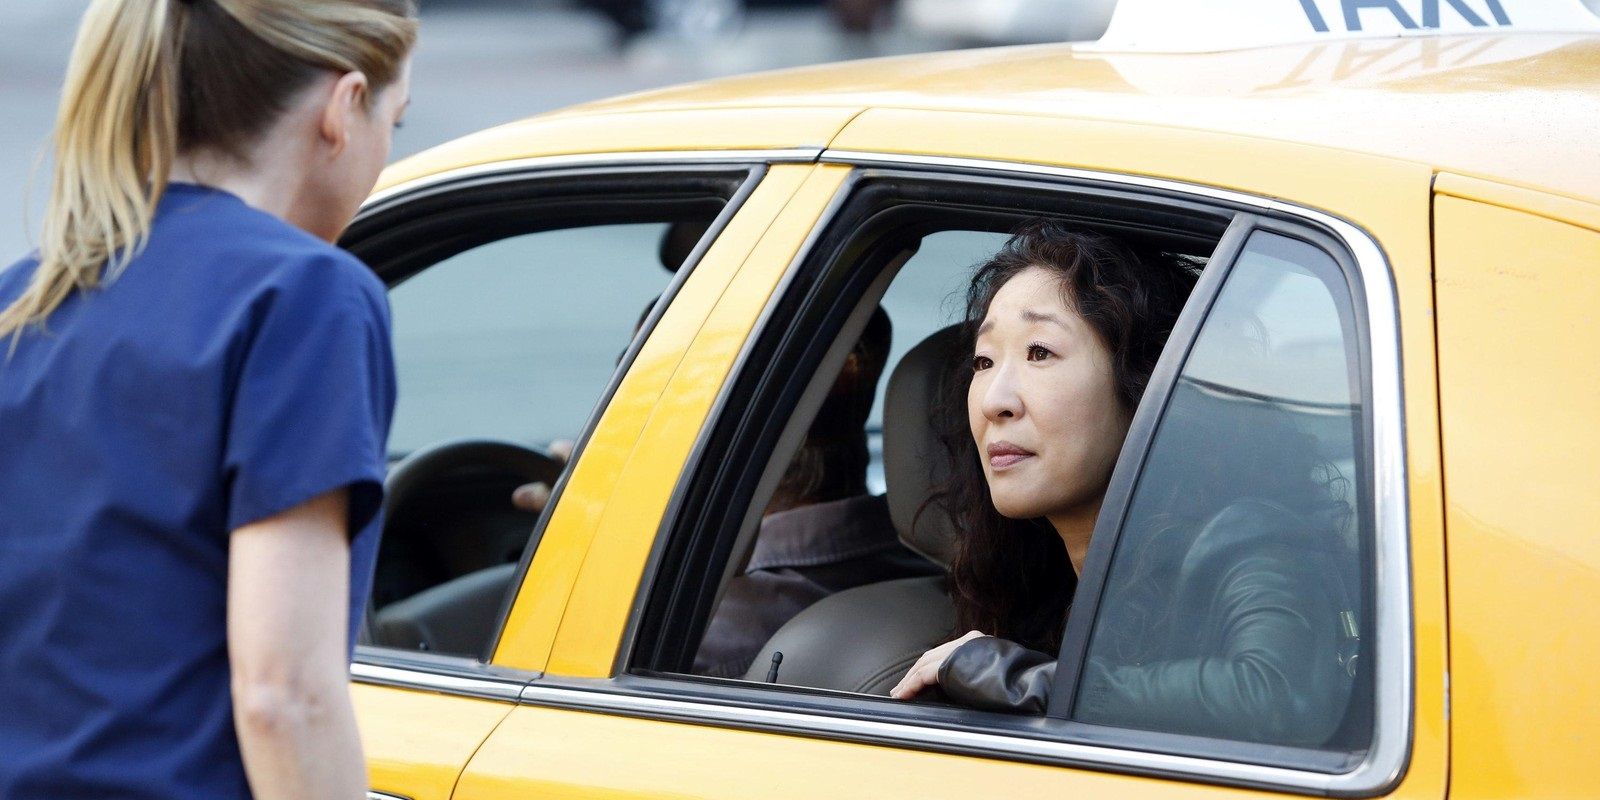 Meredith talking to Cristina as she leaves in a taxi